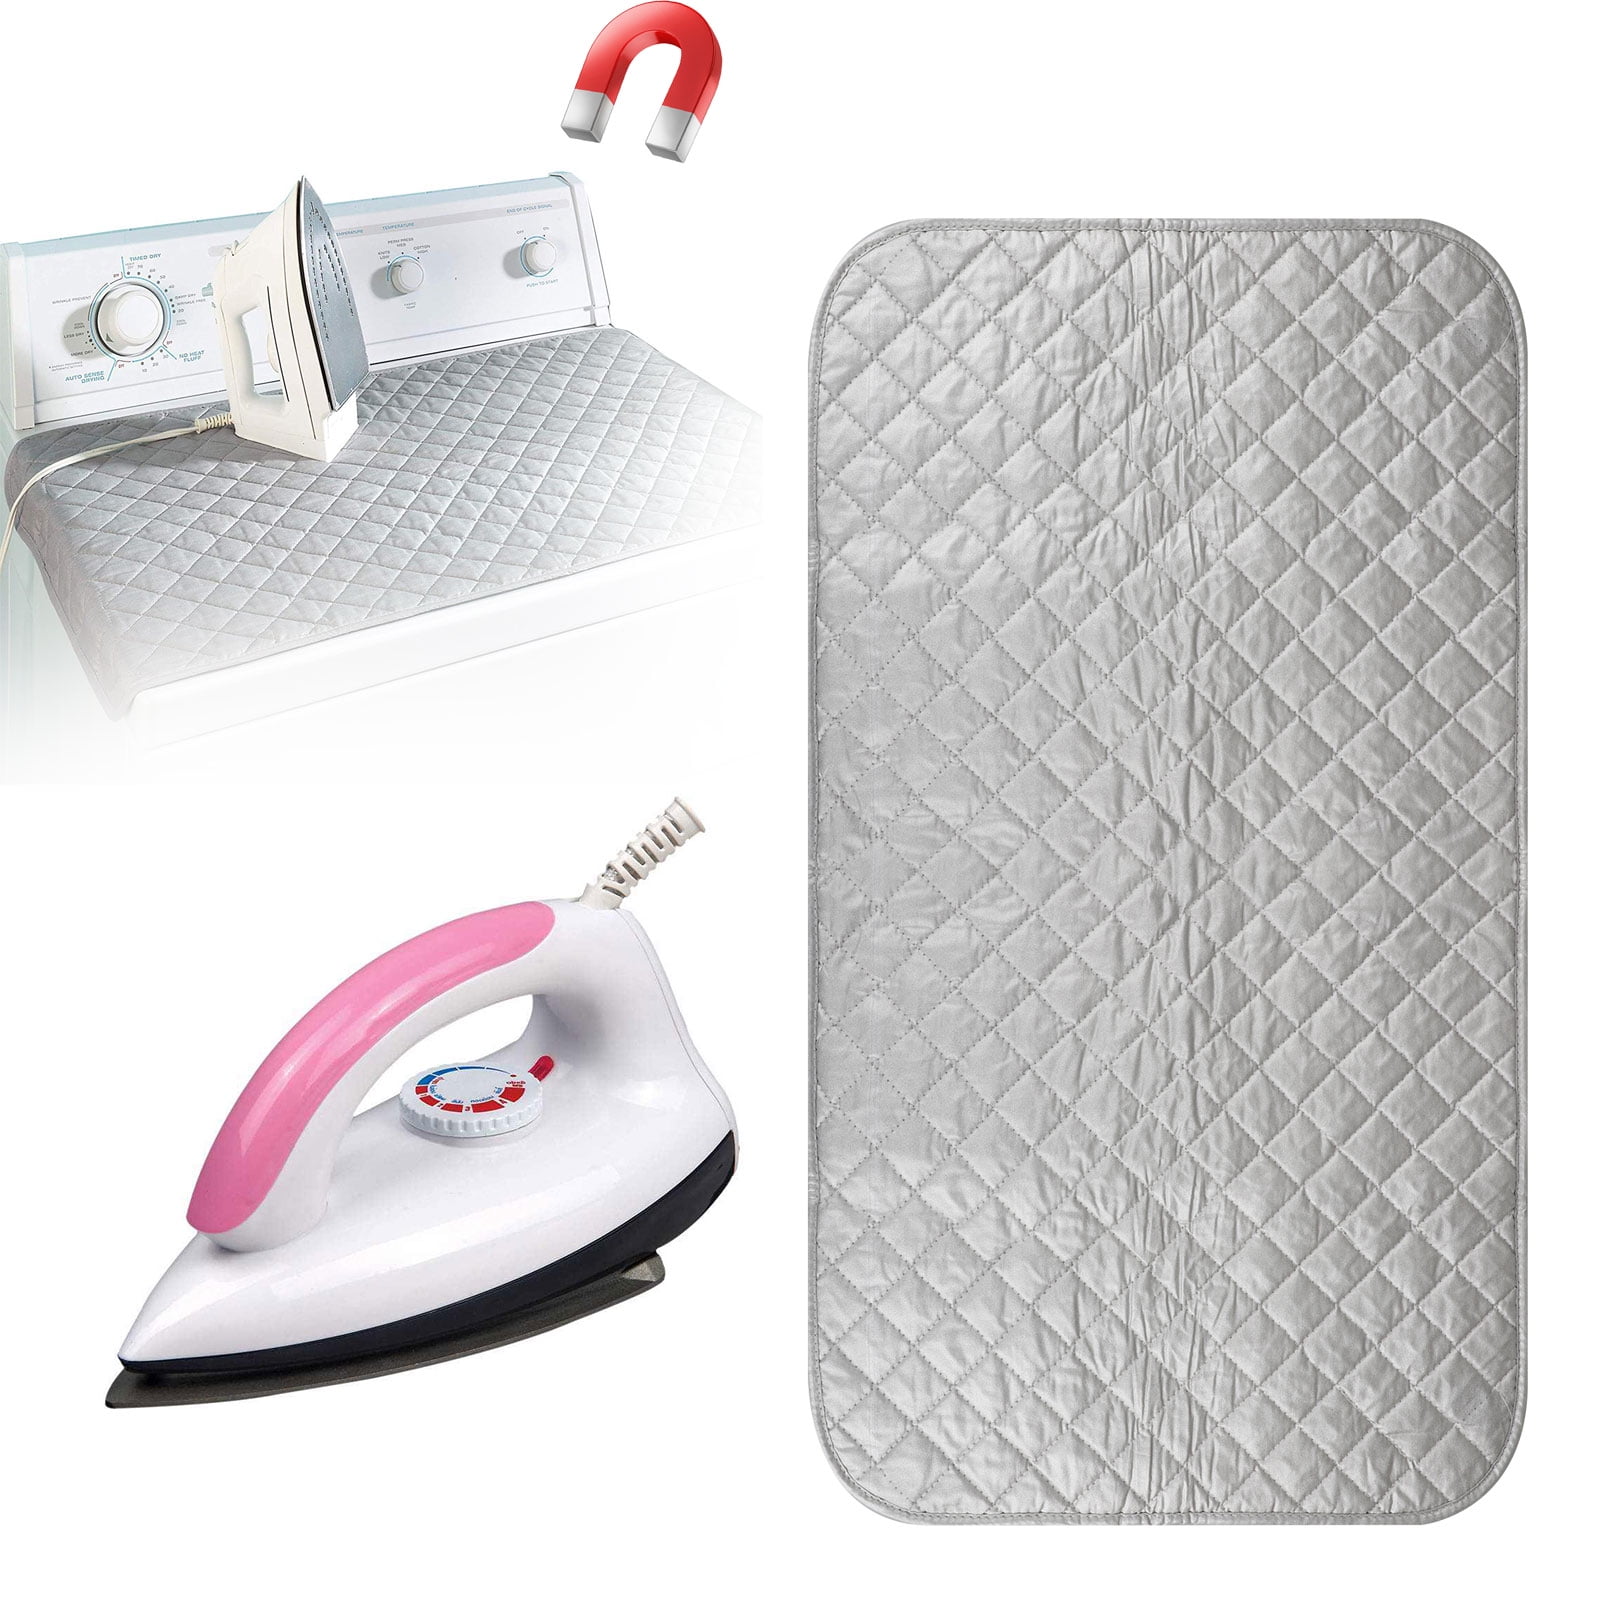 Portable Ironing Blanket Mat Heat Resistant silver silicone Grey 